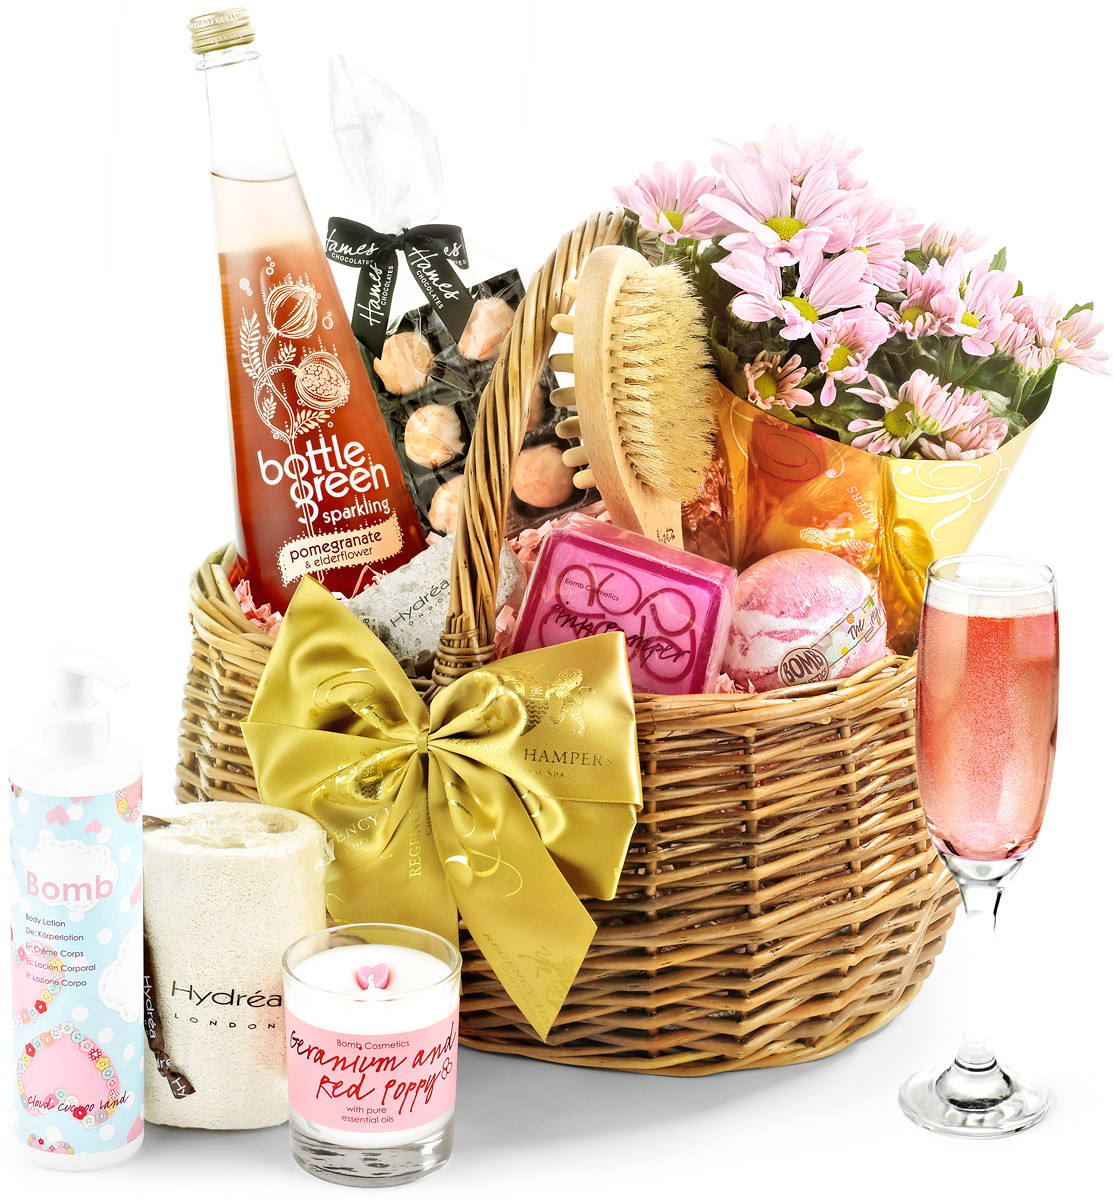 Pampering Gift Basket Ideas
 Luxury Floral Pampering Set Gift Basket With Alcohol Free